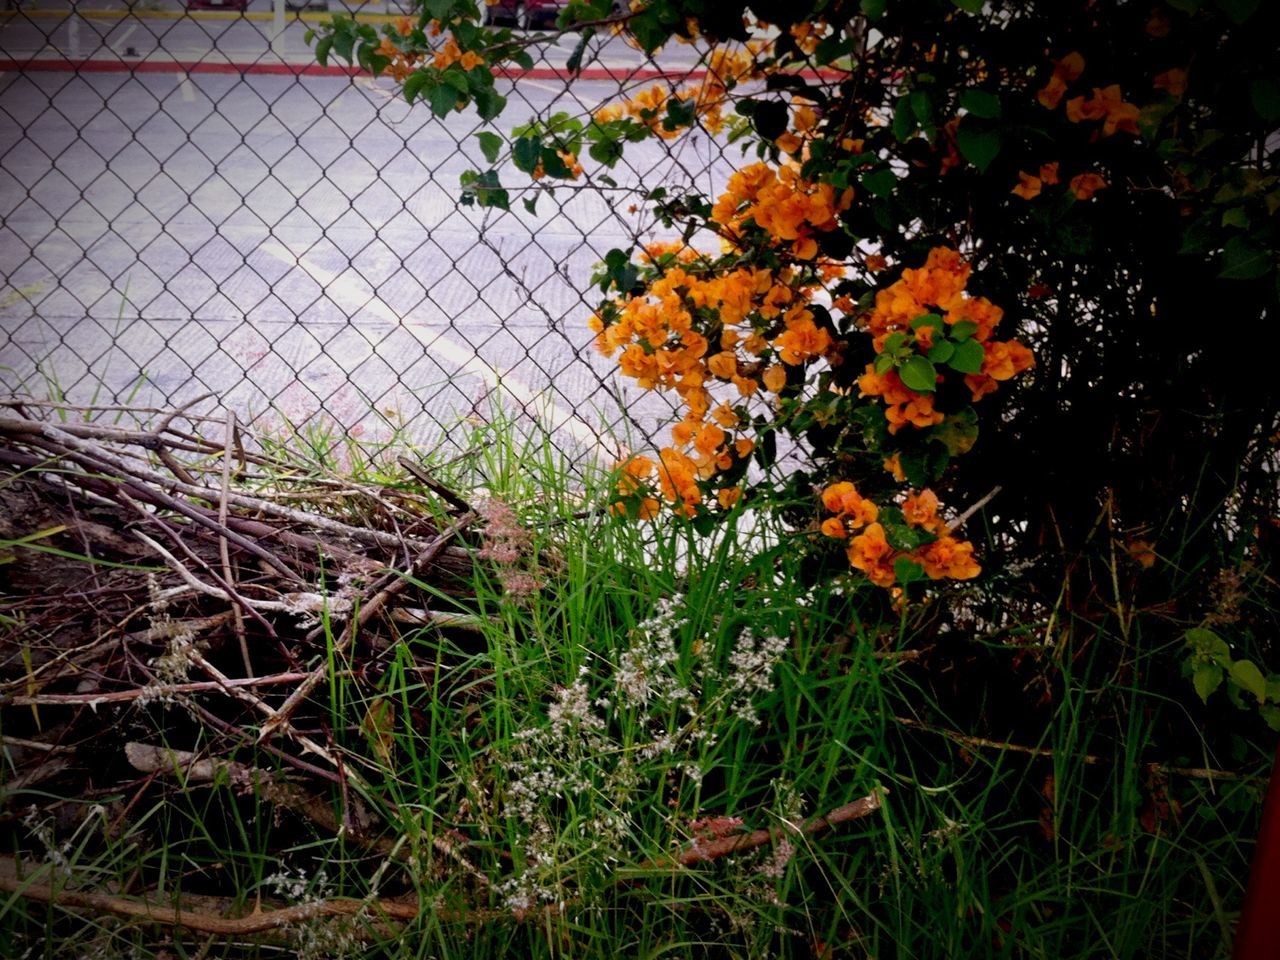 growth, plant, grass, field, flower, nature, chainlink fence, fence, leaf, fragility, beauty in nature, orange color, yellow, no people, outdoors, day, freshness, focus on foreground, high angle view, autumn